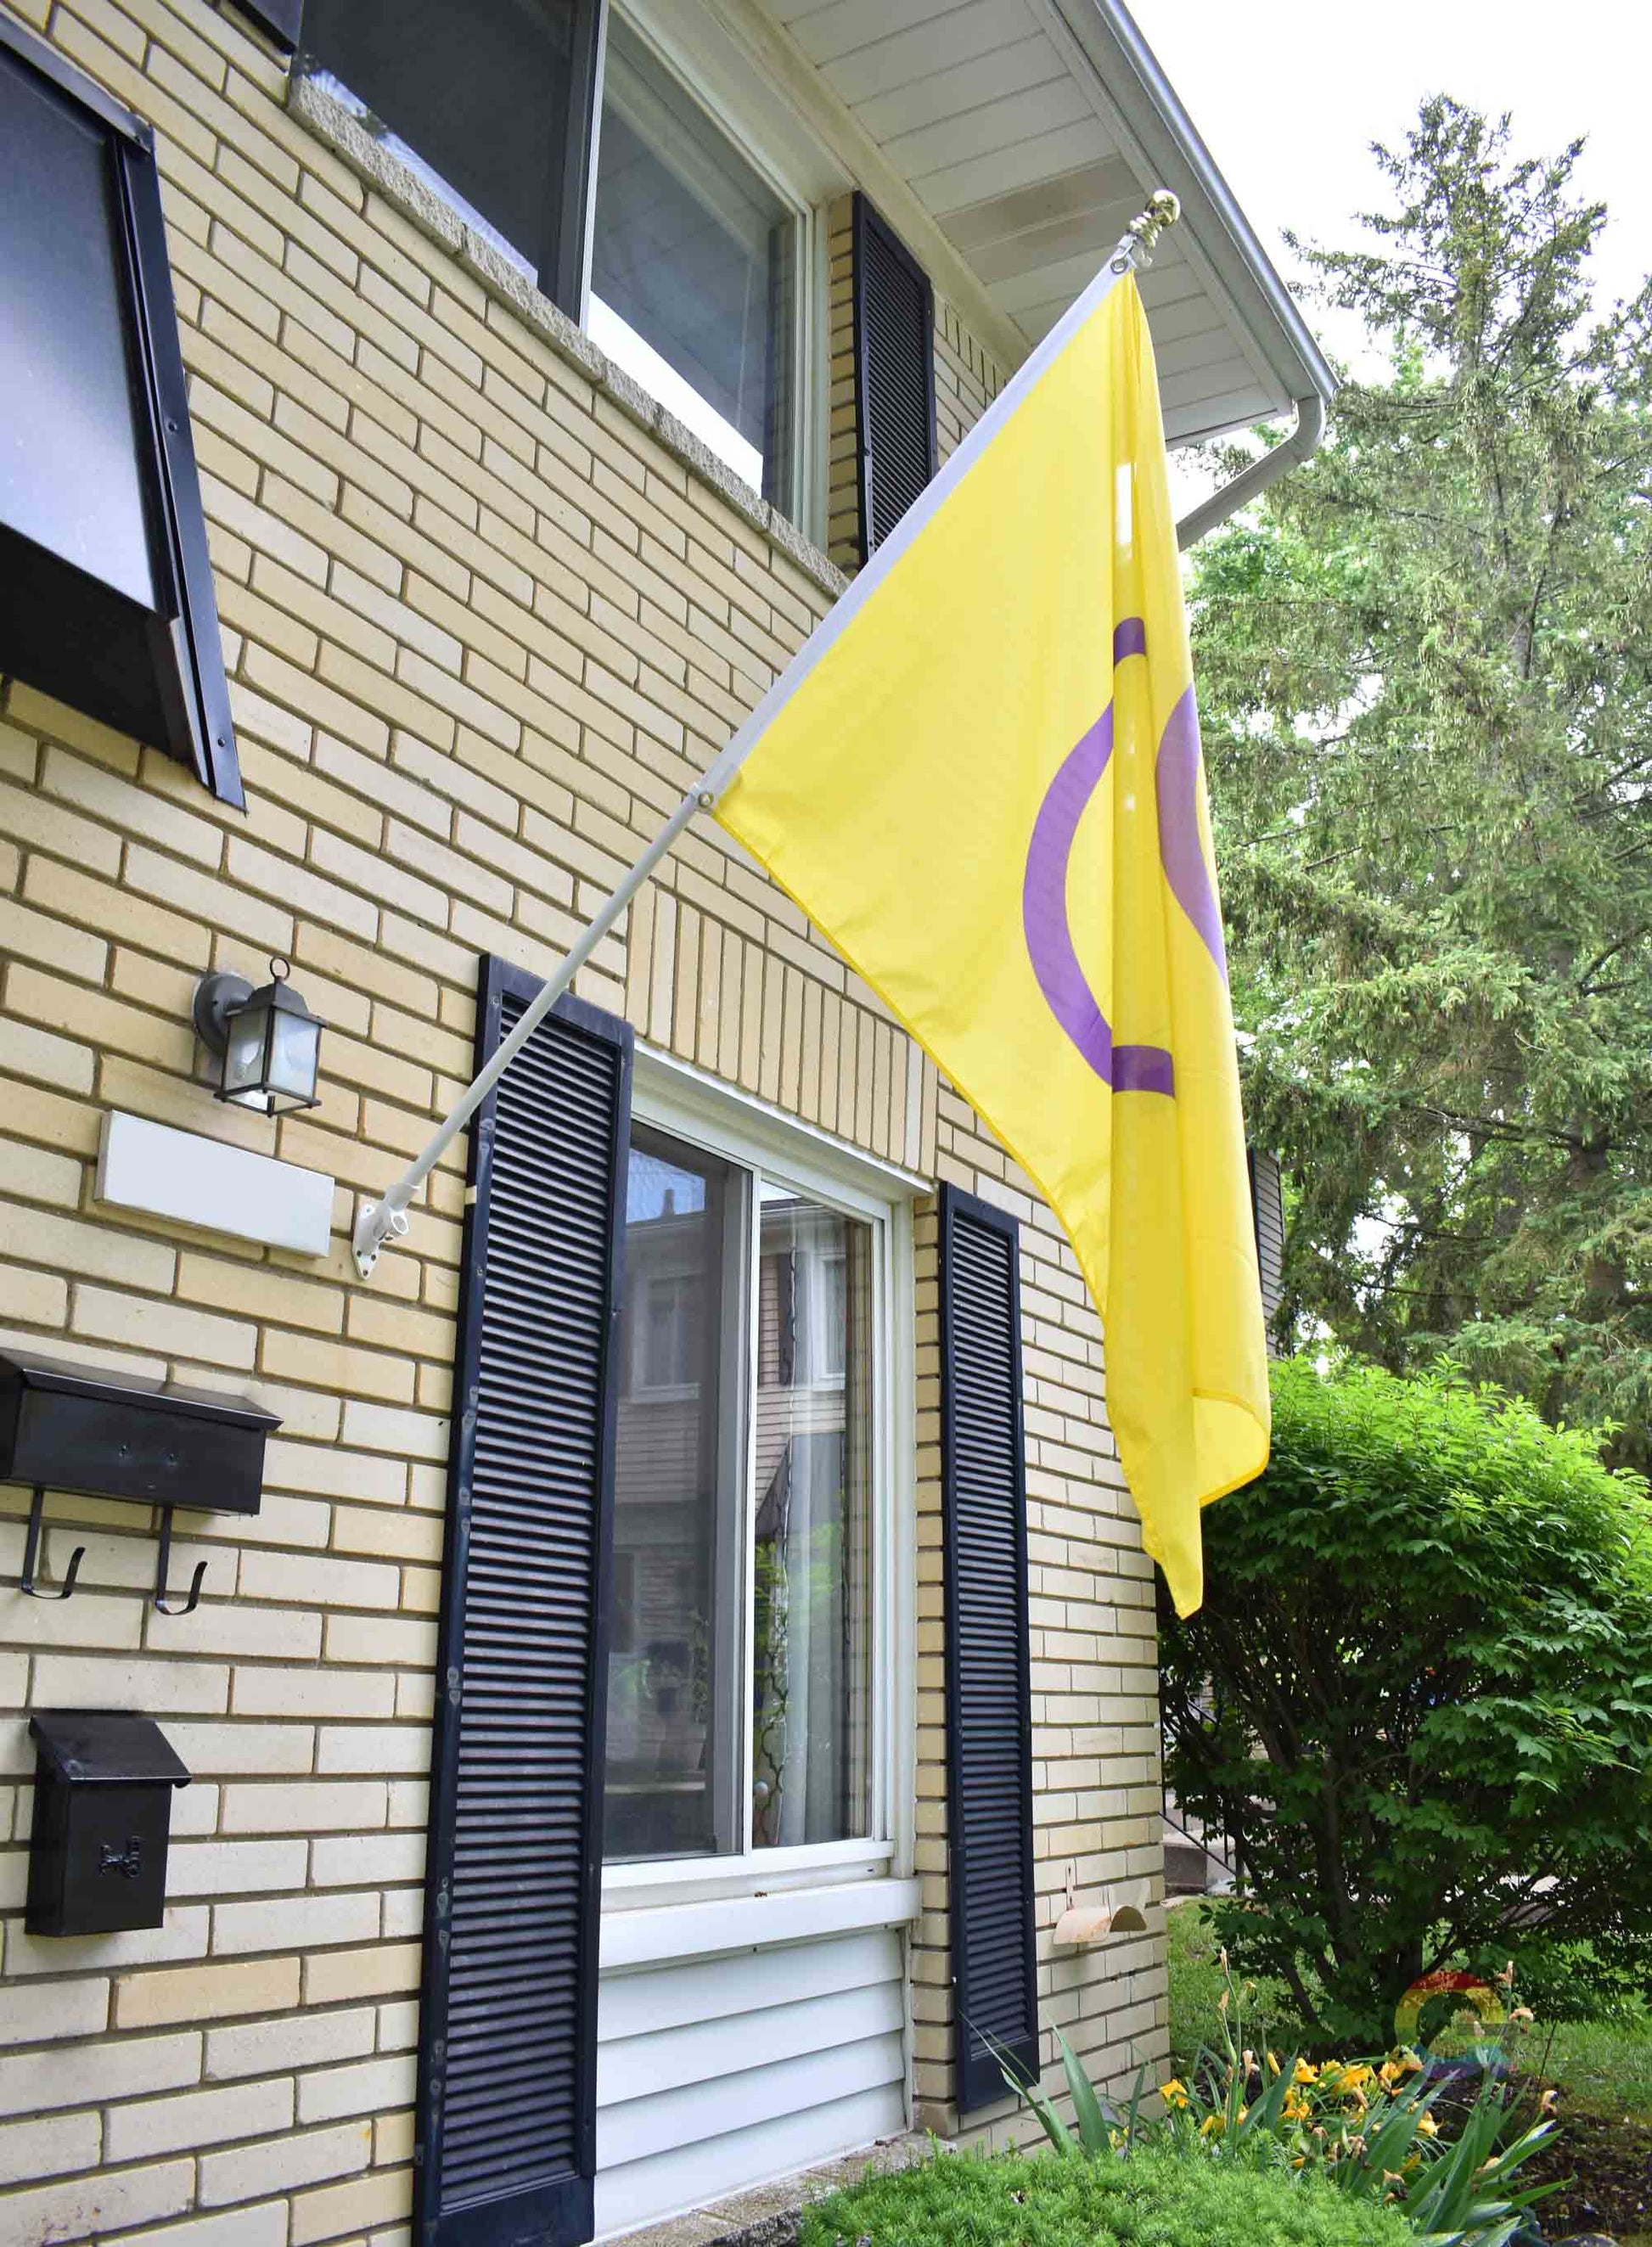 3’x5’ intersex pride flag hanging from a flagpole on the outside of a light brick house with dark shutters